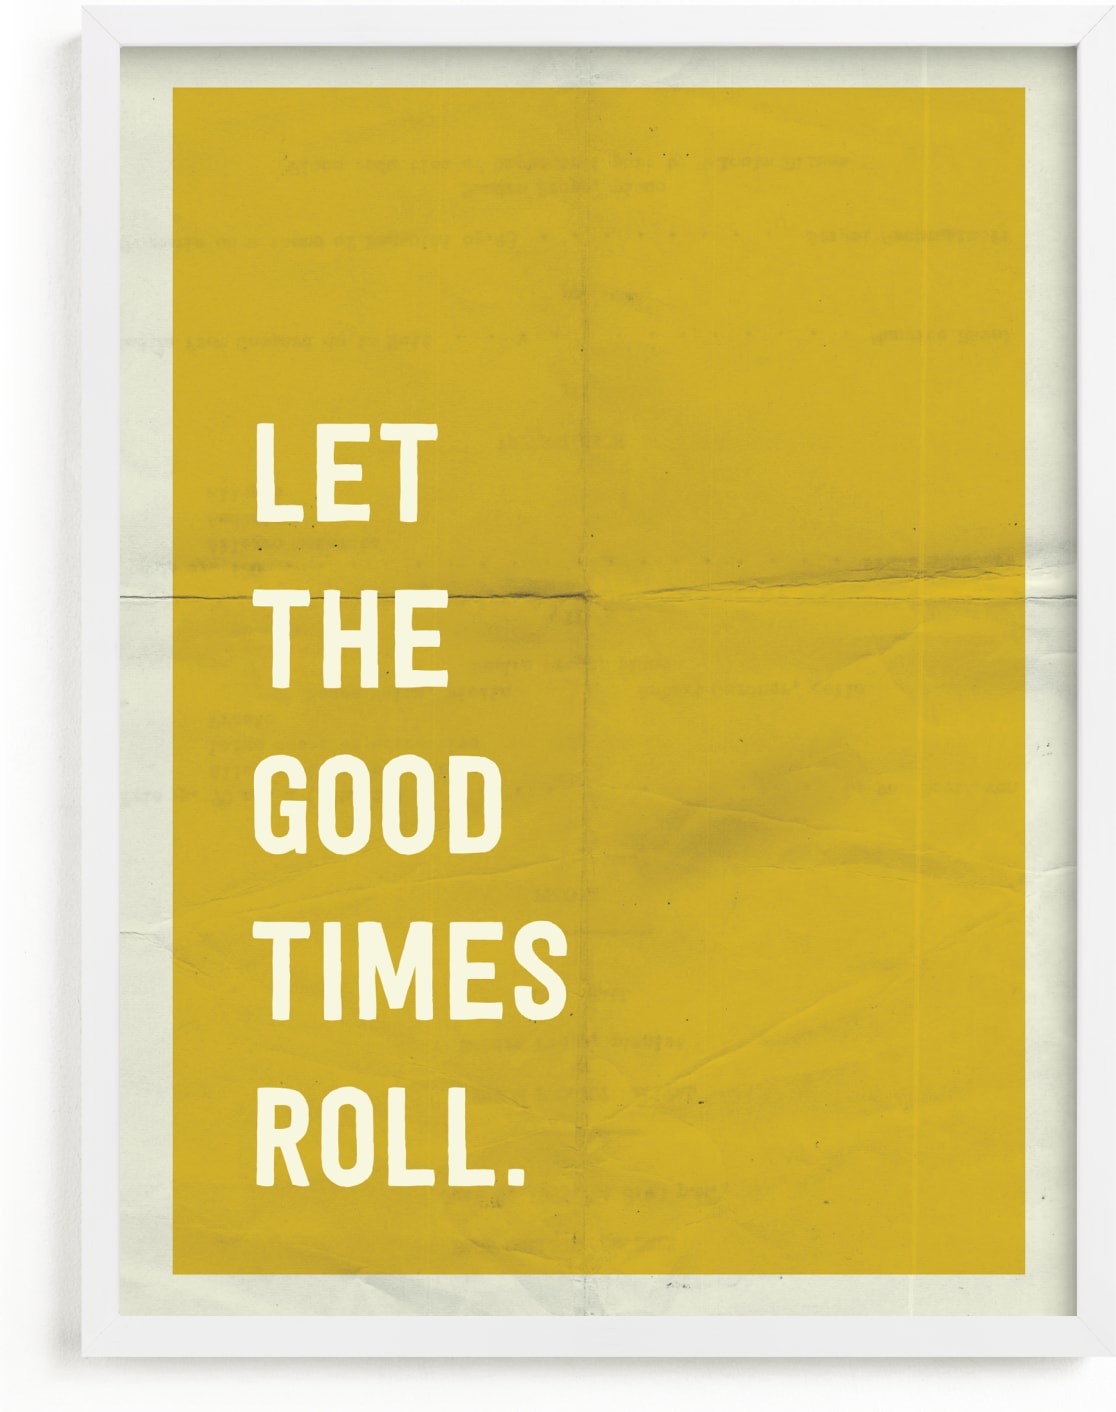 This is a yellow art by Morgan Kendall called Let the Good Times Roll.